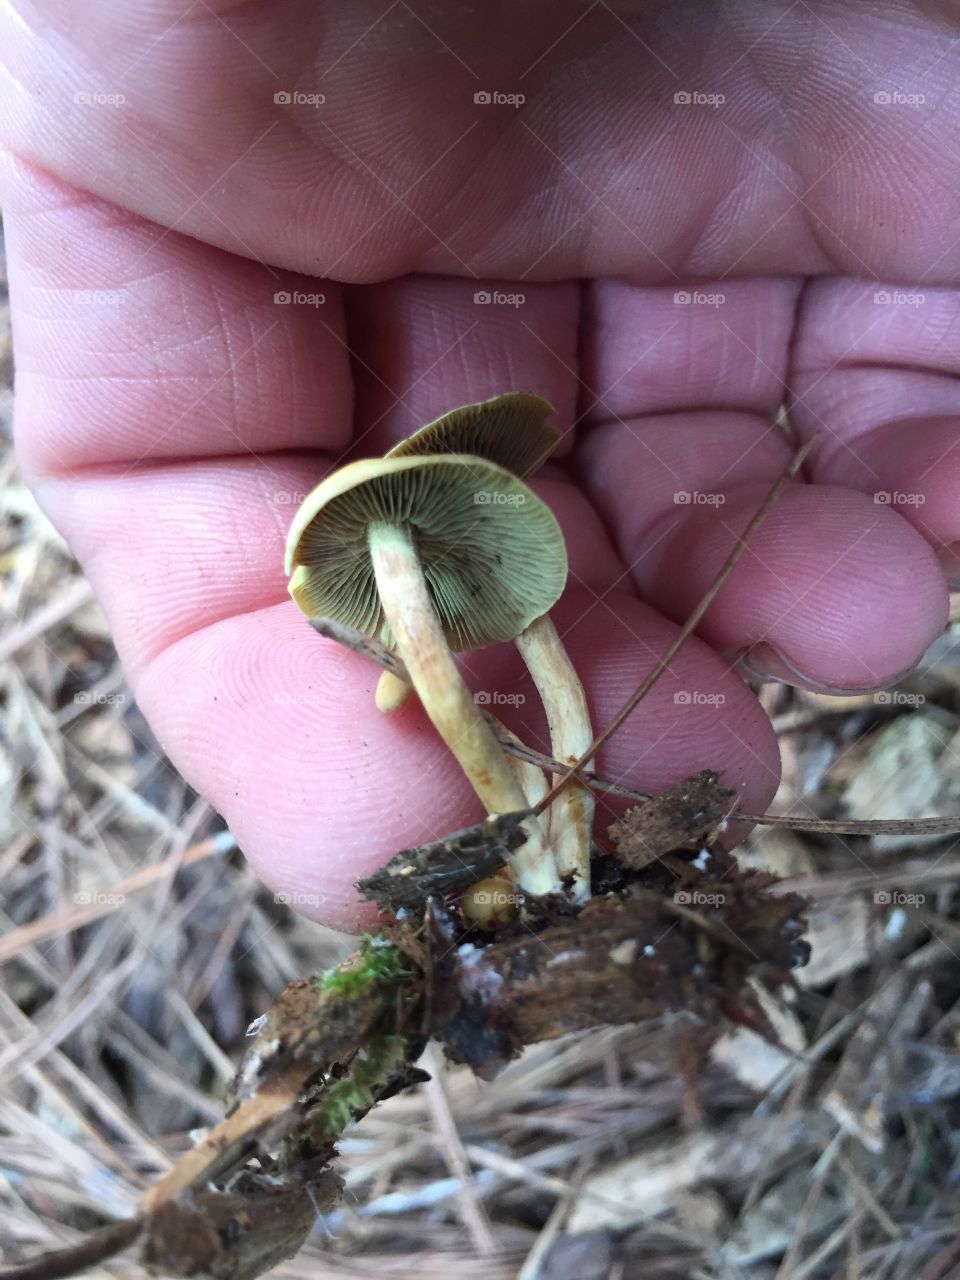 1” mushrooms found growing in wood chips beneath a large oak tree.